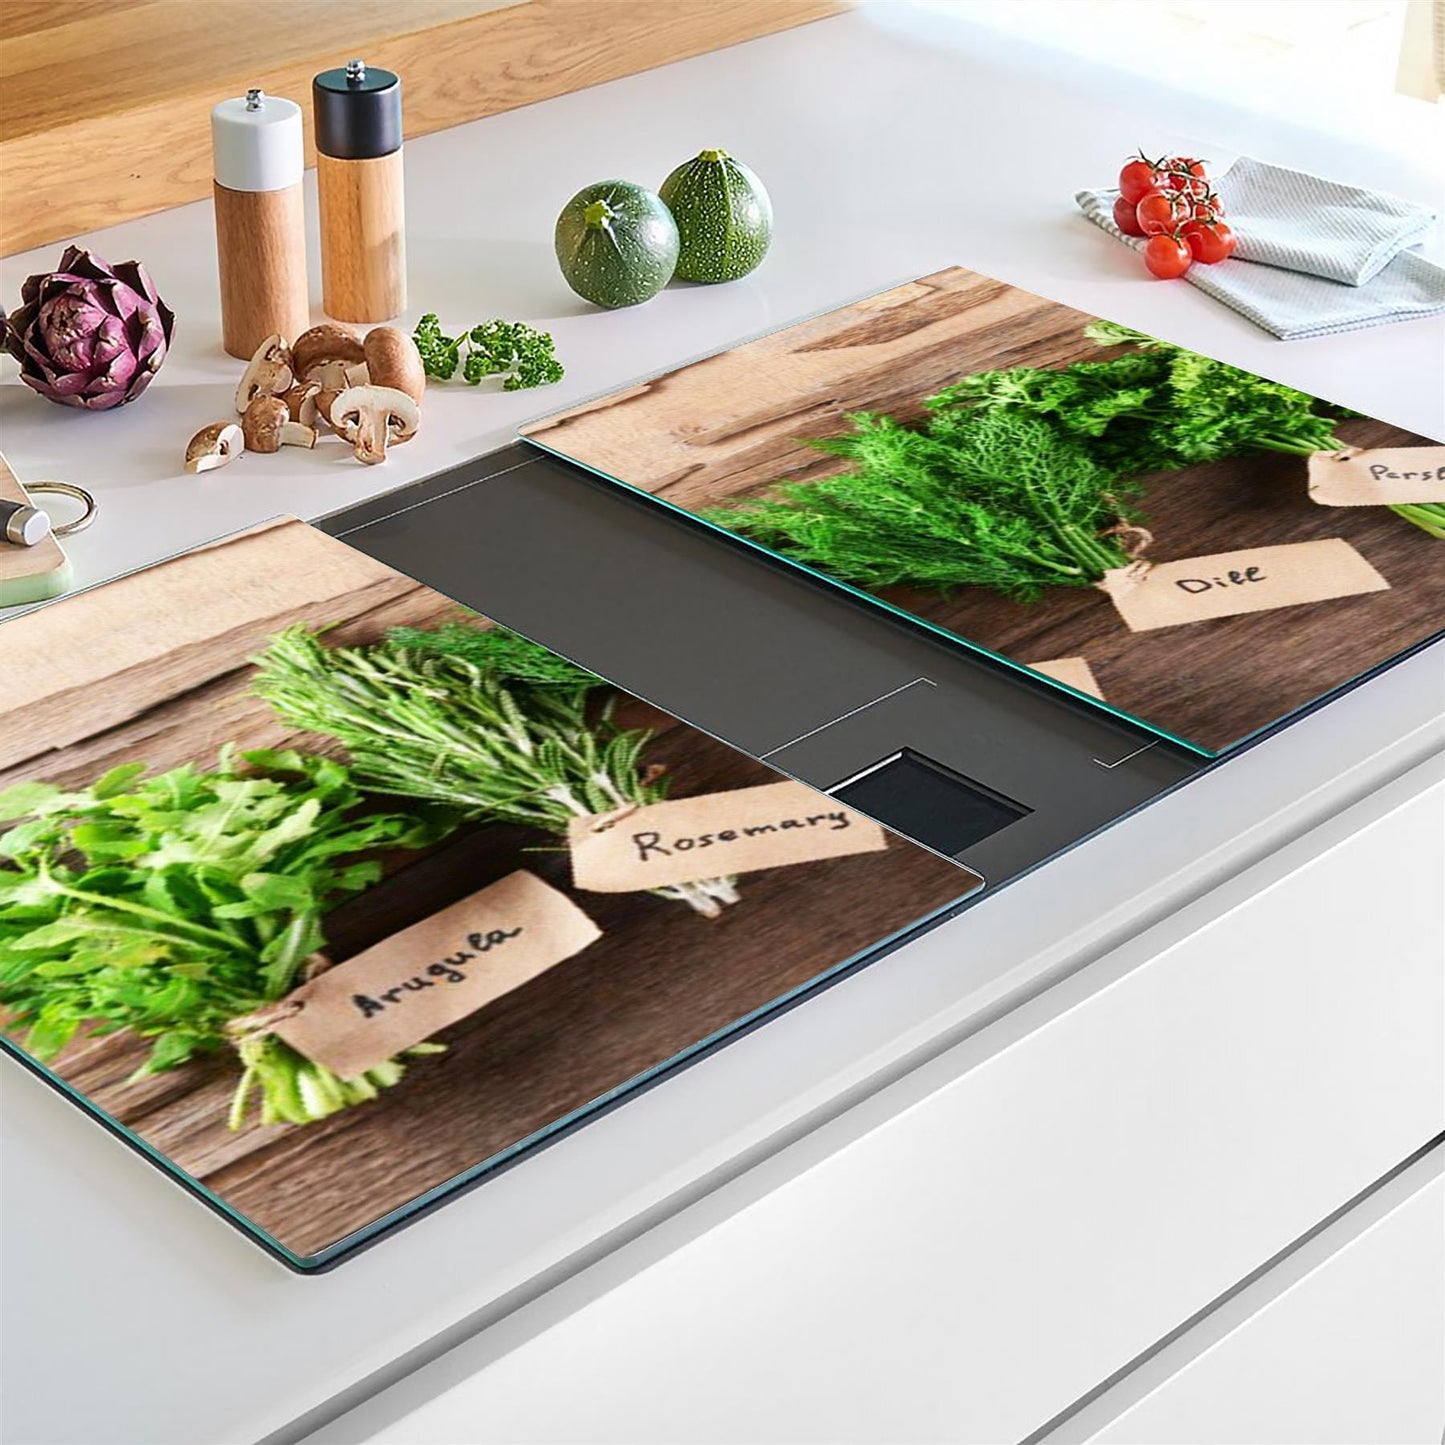 Glass Cutting Boards with Herbs Design by Geezy - UKBuyZone